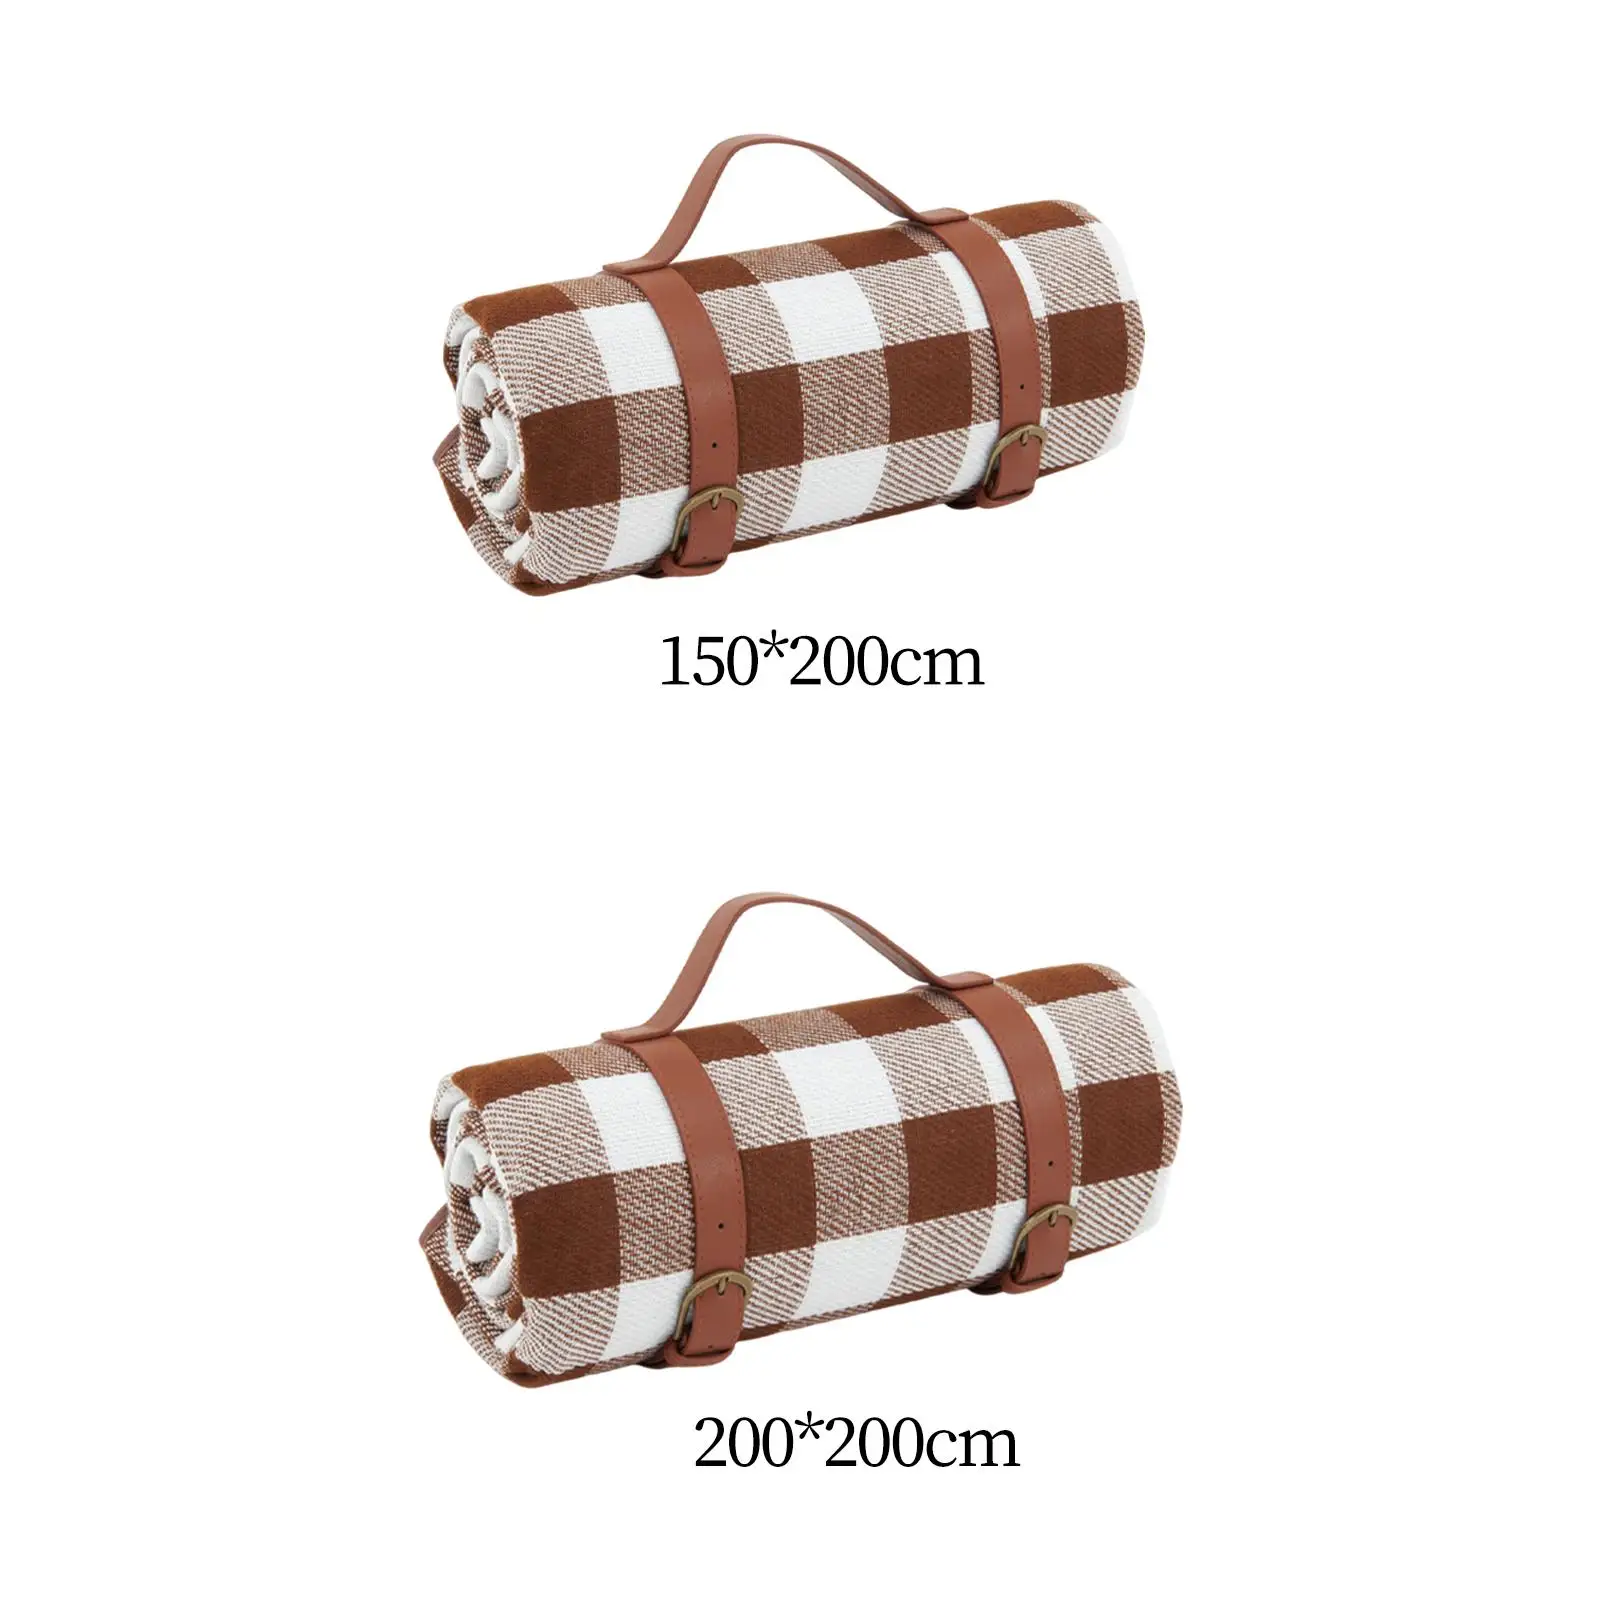 Picnic Blanket PU Leather Handle Outdoor Blanket Compact Rug for Camping Travel